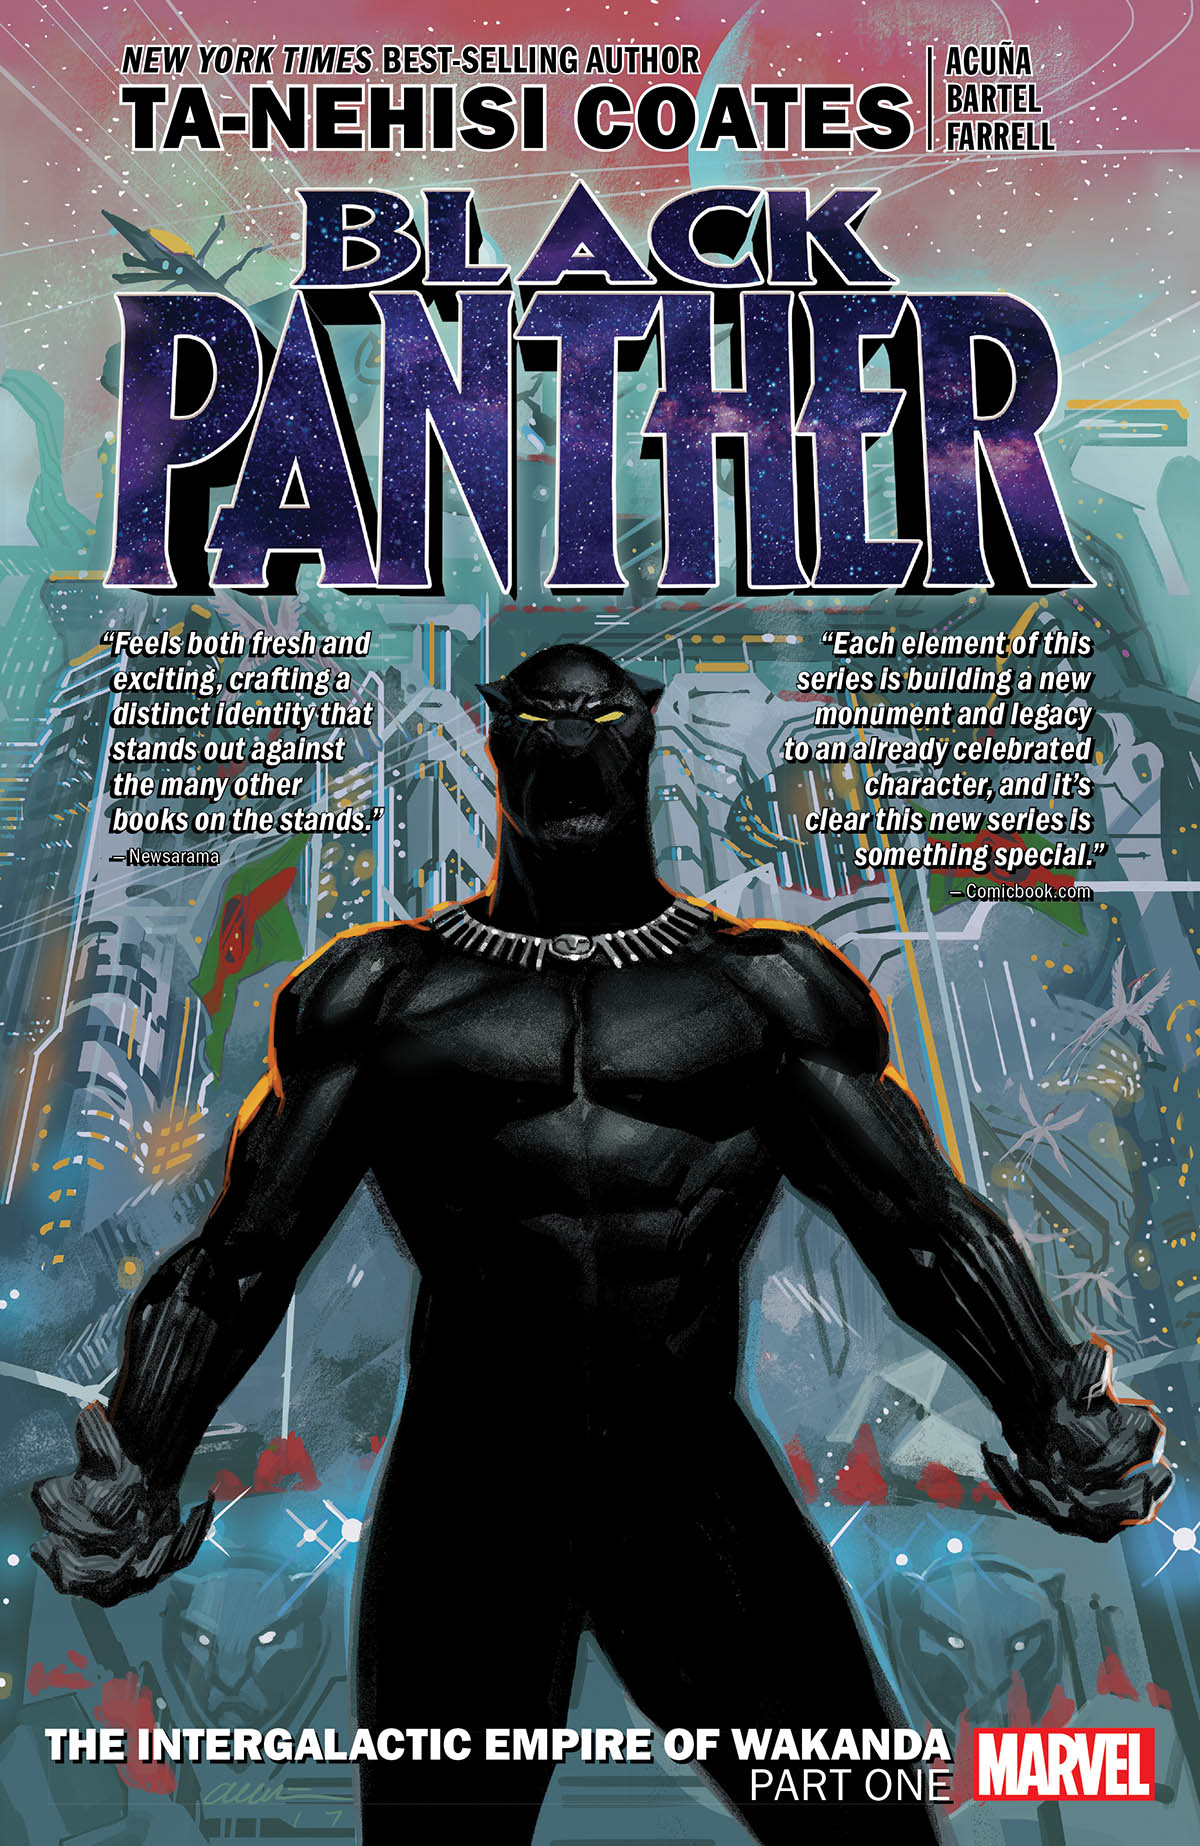 shadow of the panther book